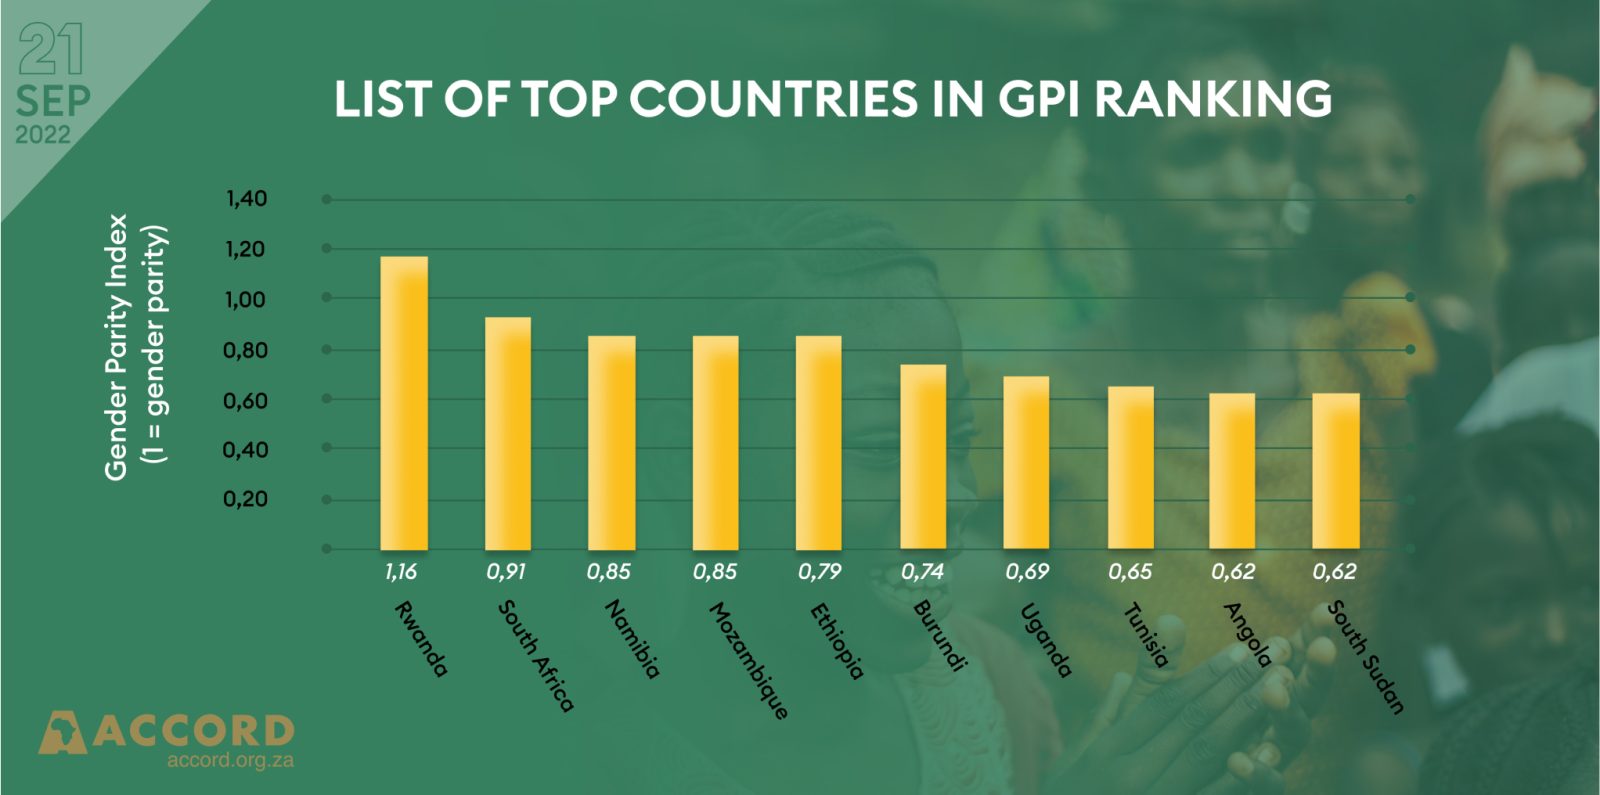 Table 1: List of Top 1- Countries in GPI Ranking